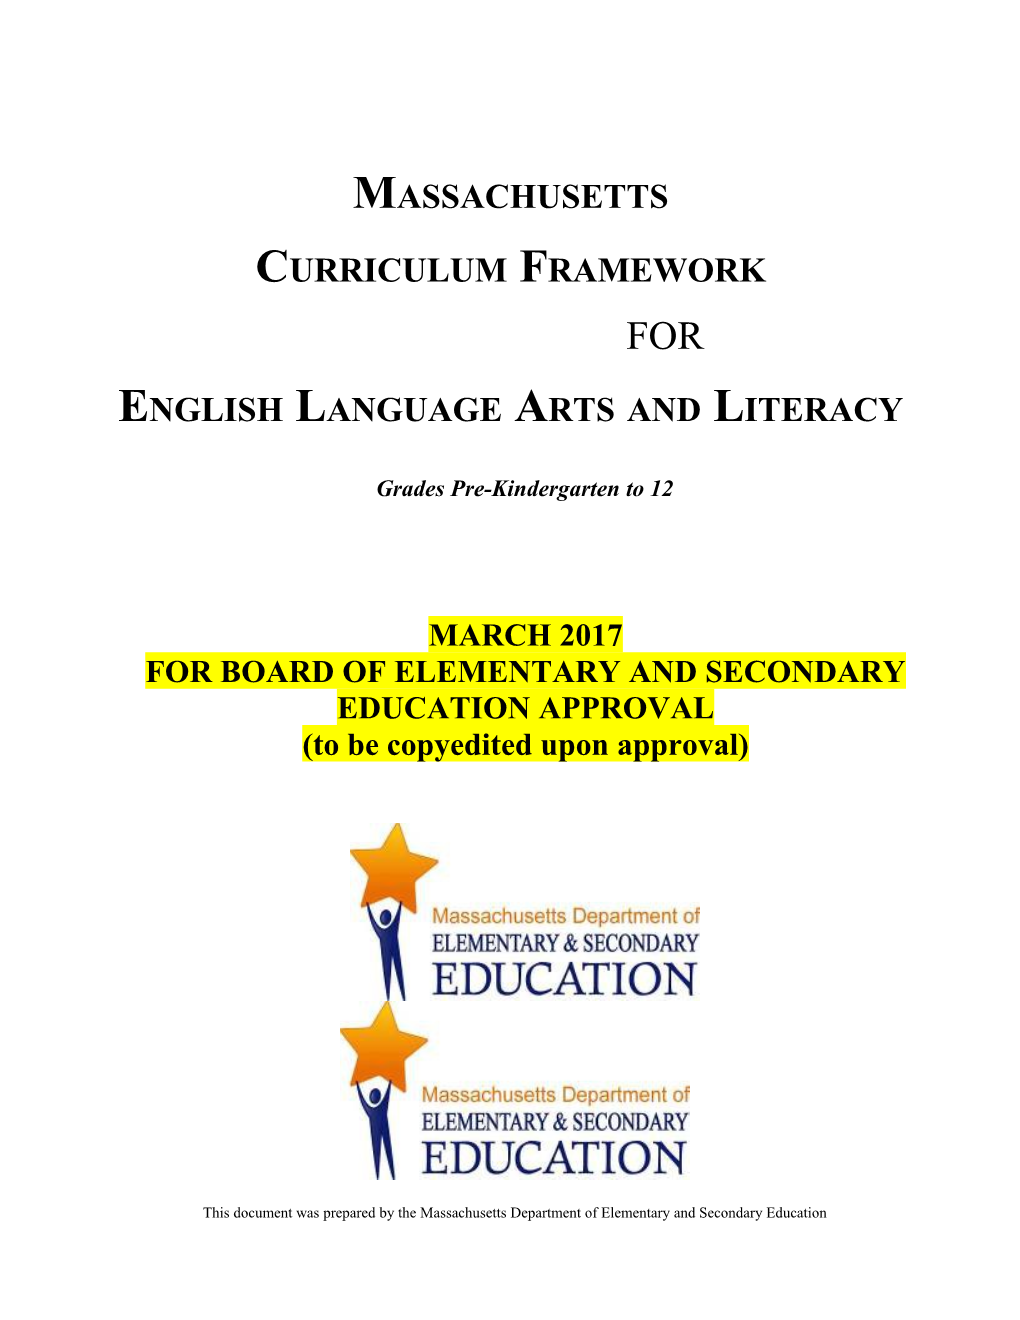 BESE March 2017: Curriculum Framework for ELA and Literacy DRAFT